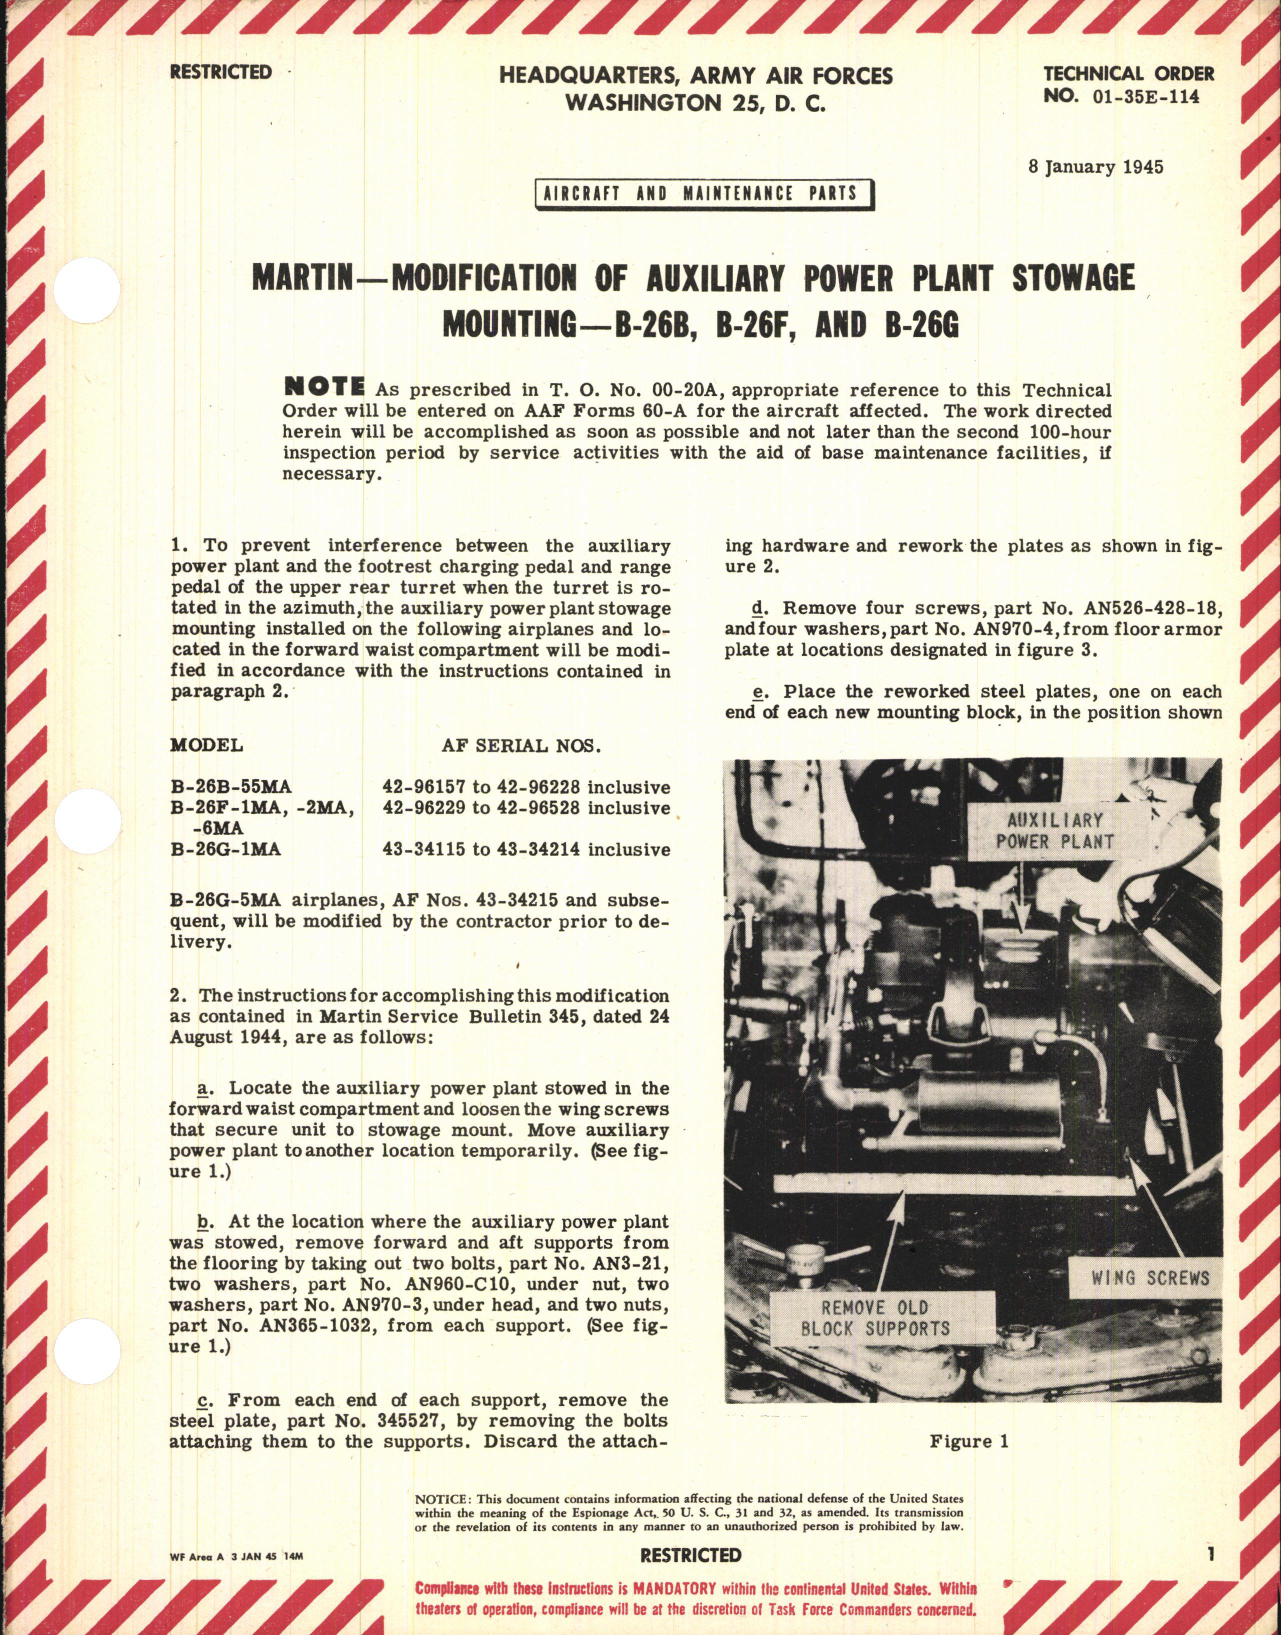 Sample page 1 from AirCorps Library document: Modification of Auxiliary Power Plant Stowage Mounting for B-26B, B-26F, and B-26G